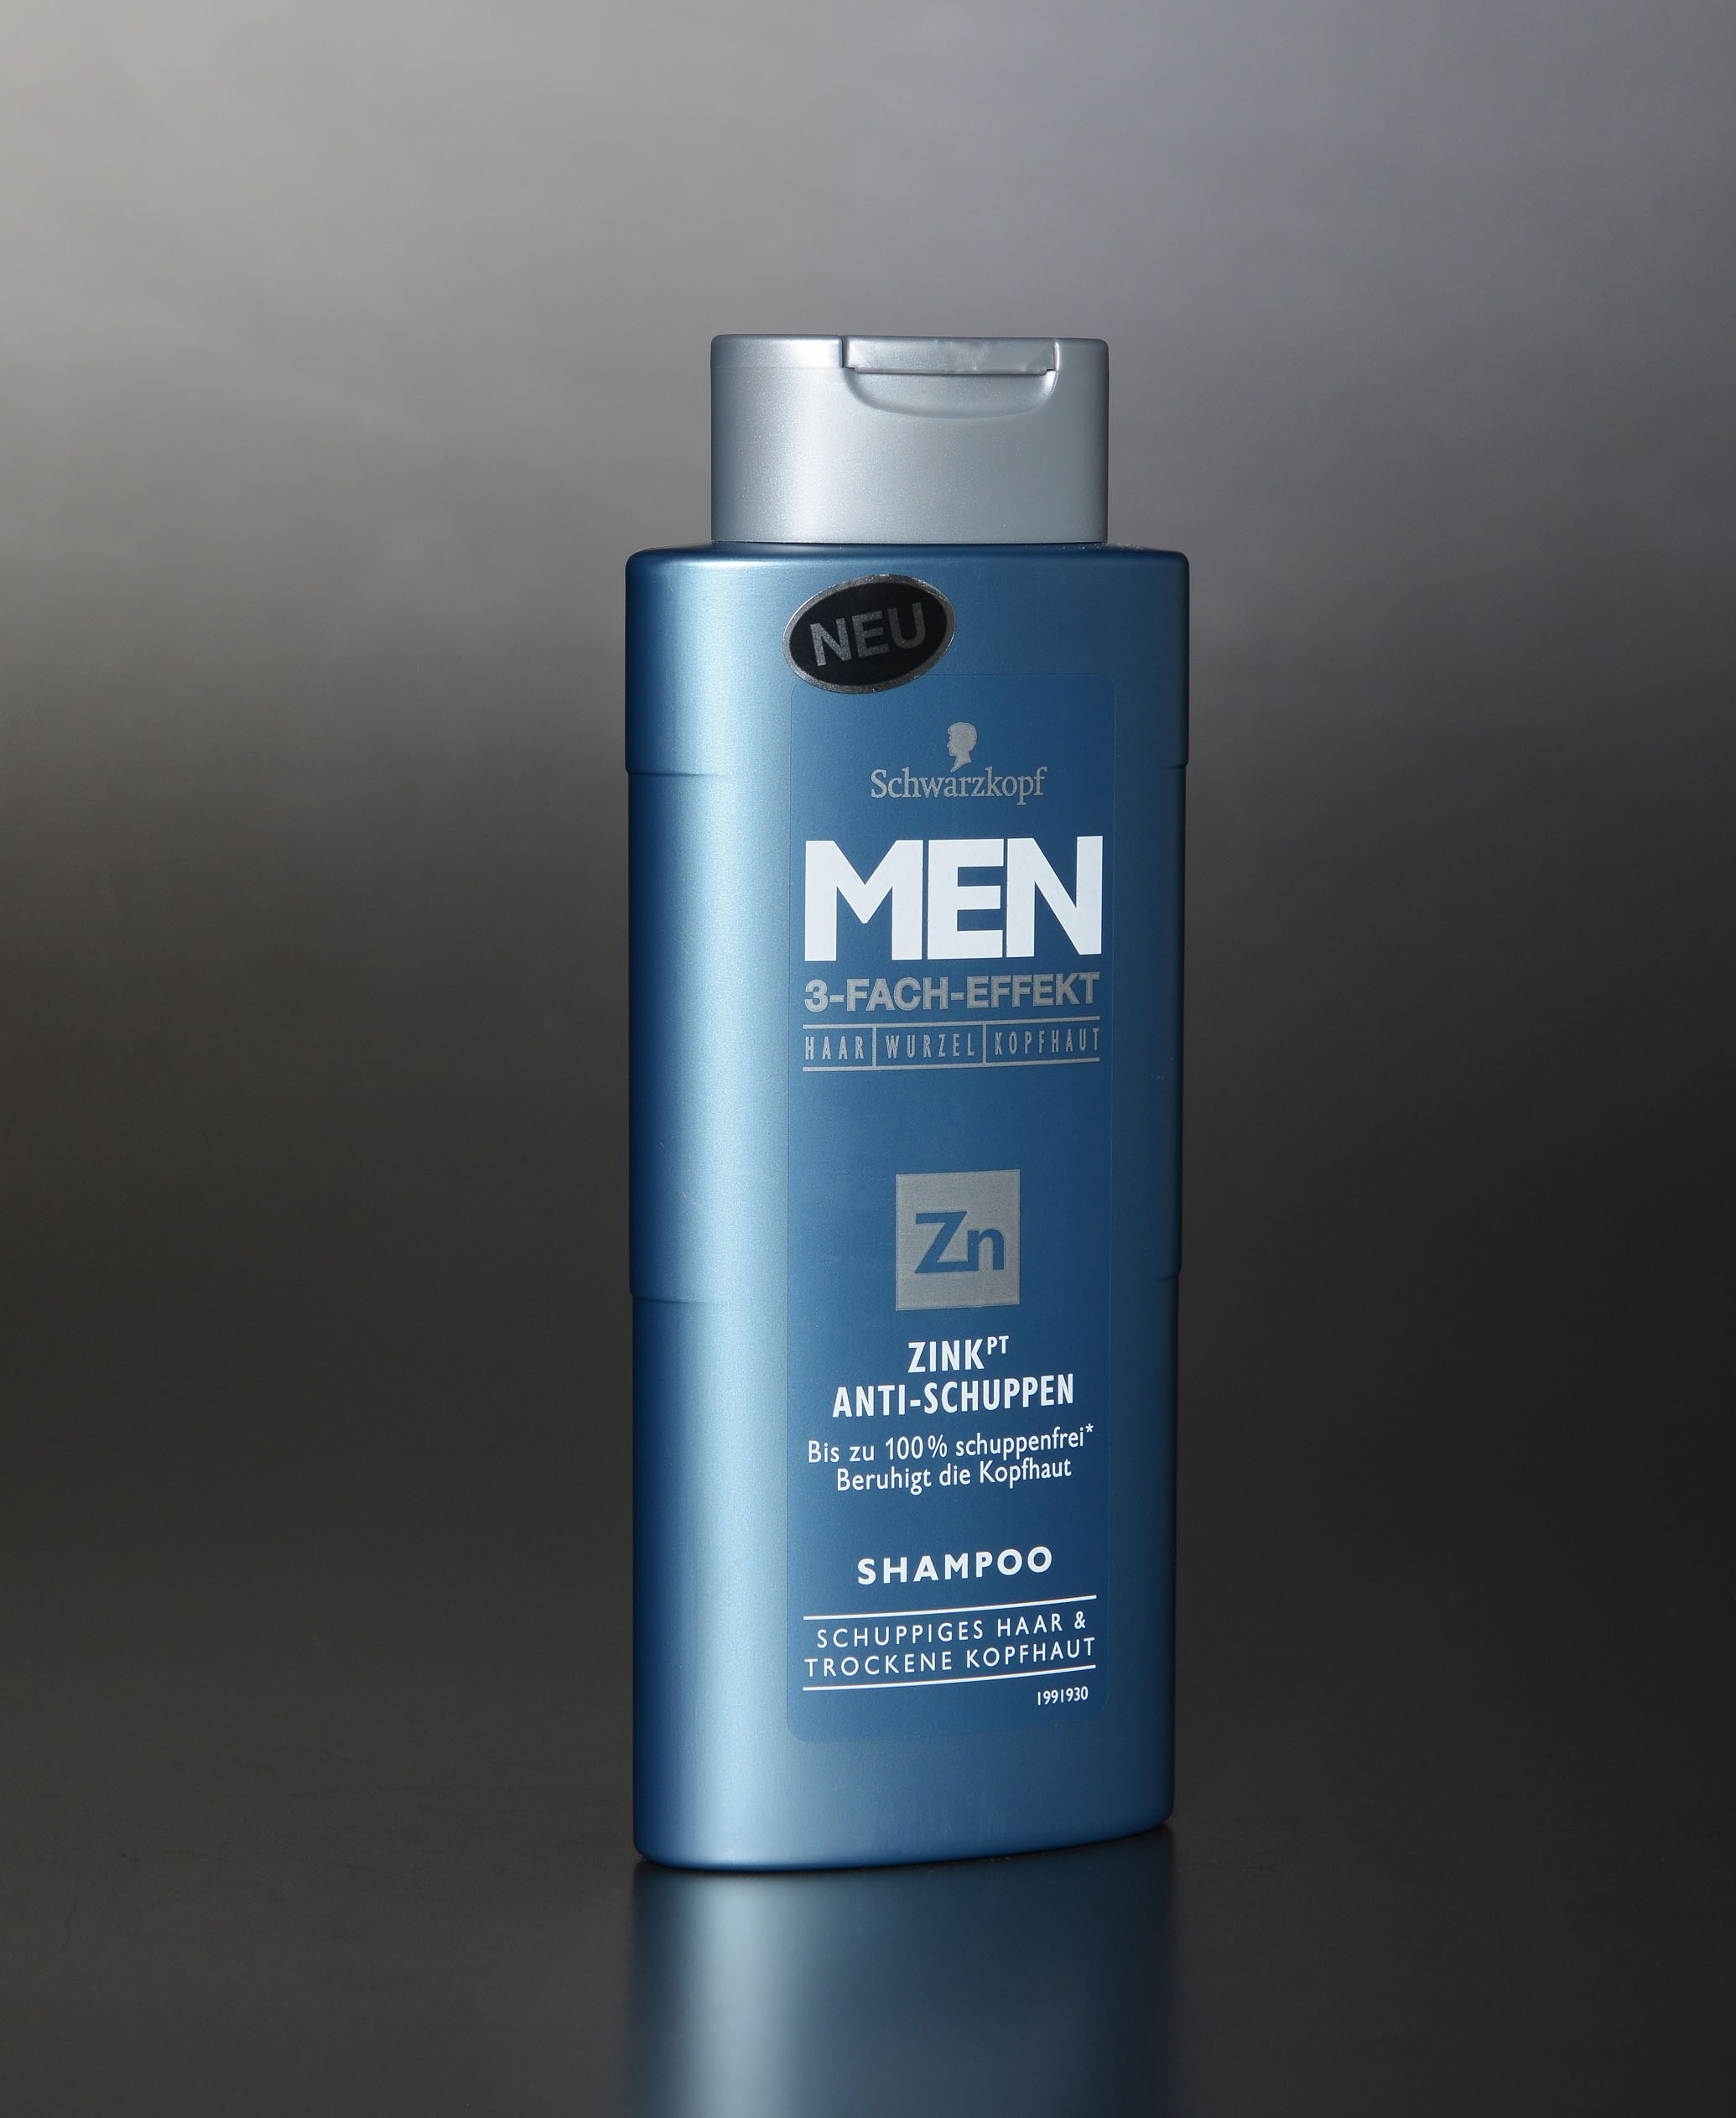 duurzame grondstof etnisch Reageer RPC creates more for men with new shampoo bottle